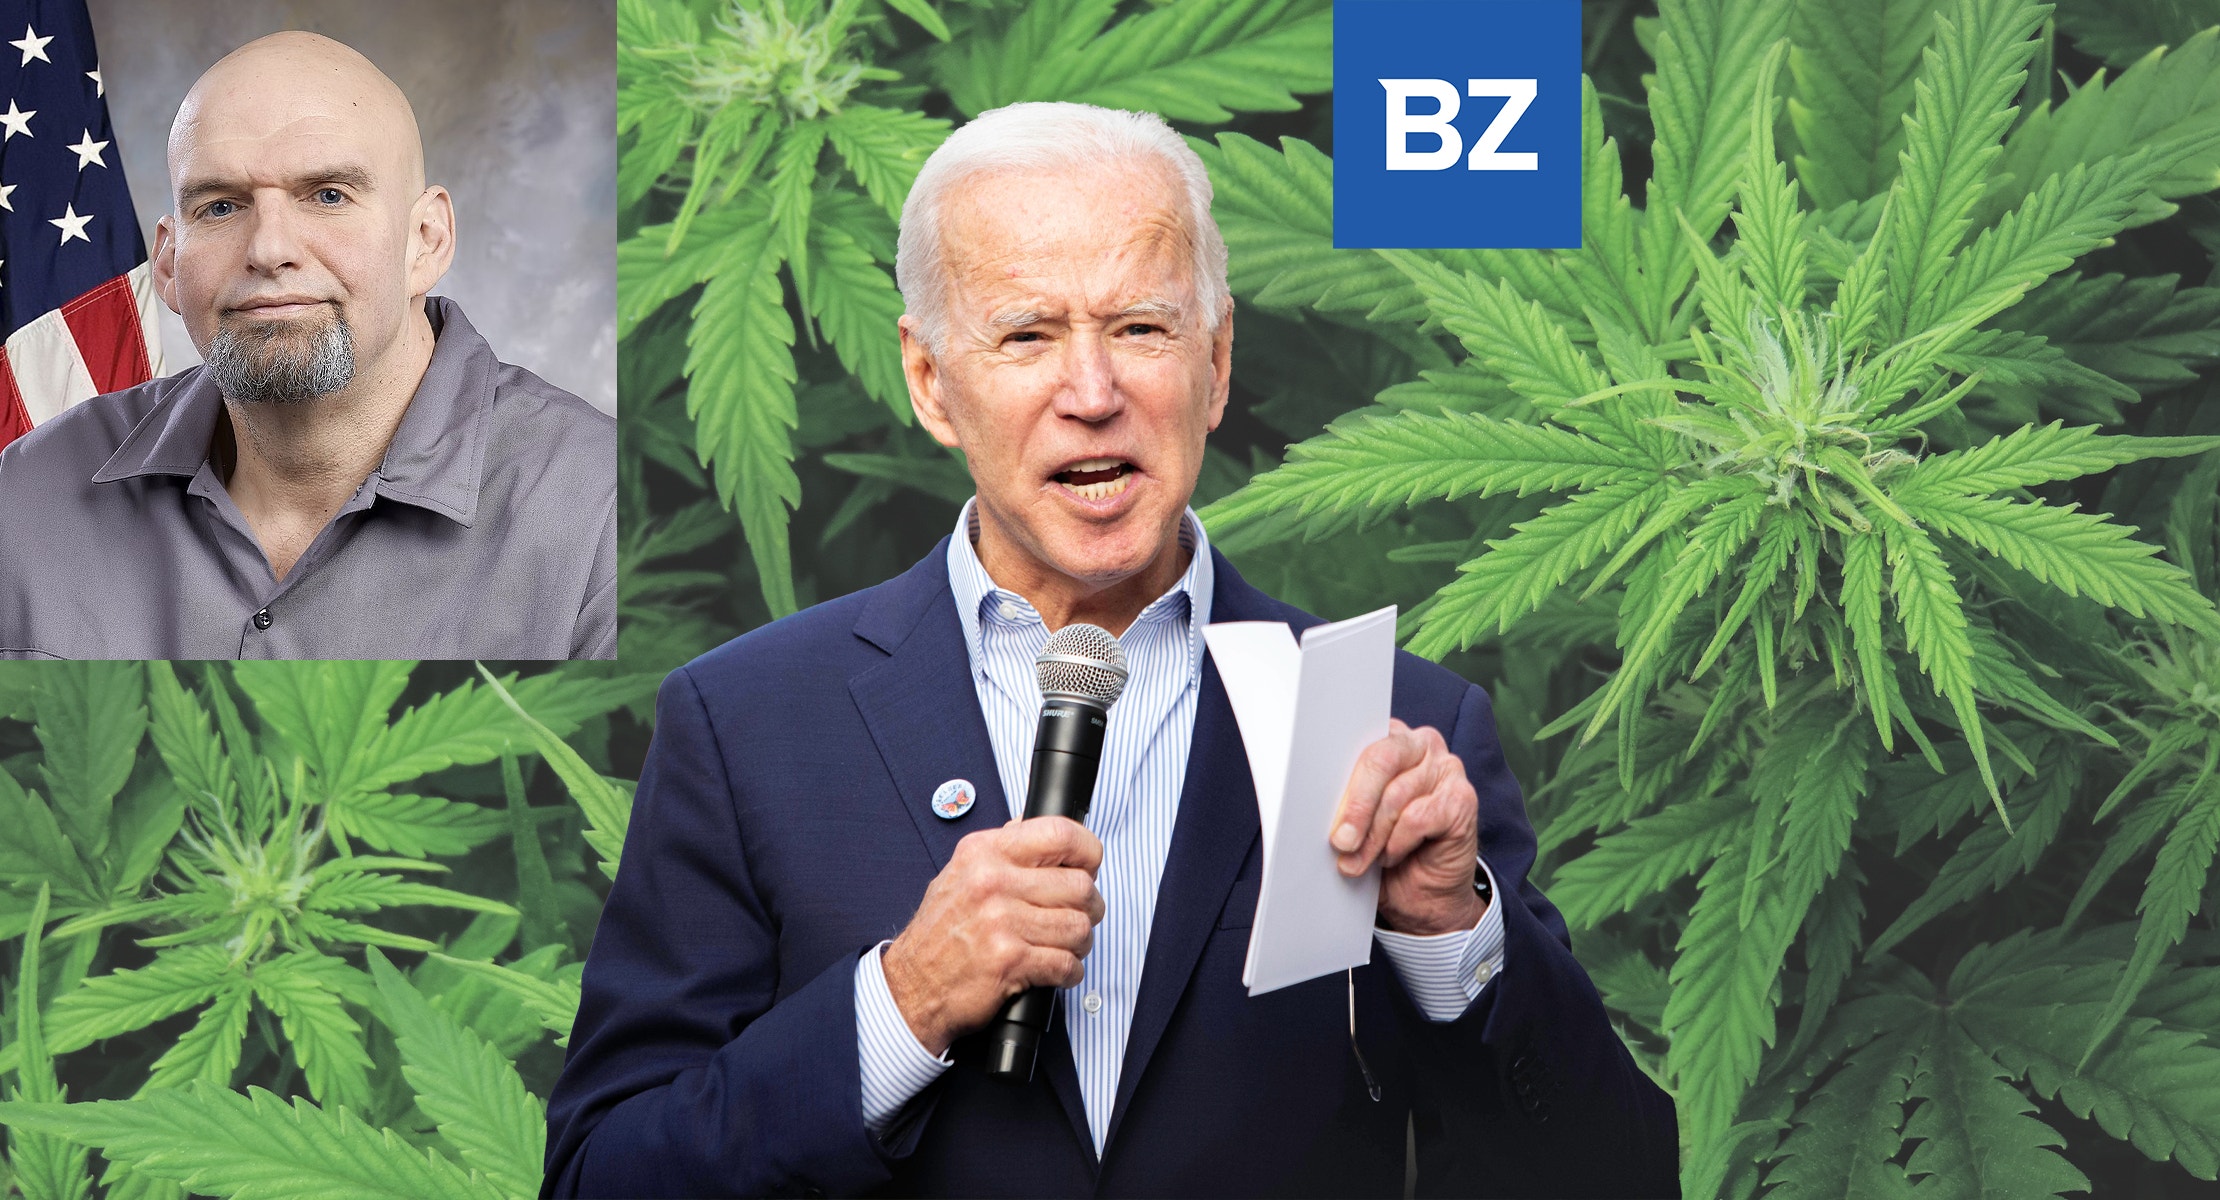 Fetterman Calls On Biden To Decriminalize Cannabis, But White House Defers To States